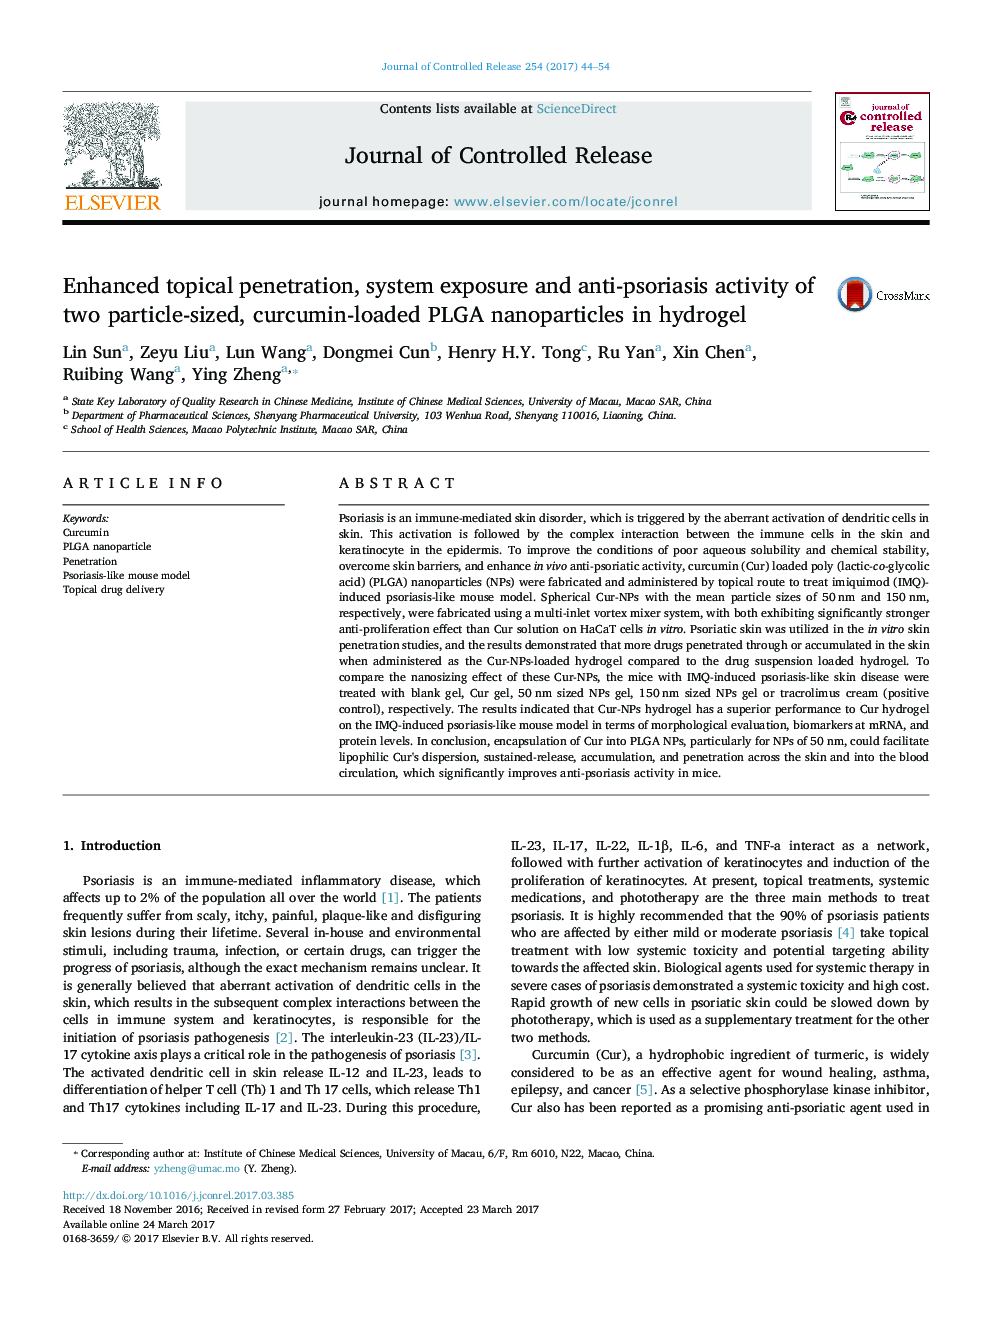 Enhanced topical penetration, system exposure and anti-psoriasis activity of two particle-sized, curcumin-loaded PLGA nanoparticles in hydrogel